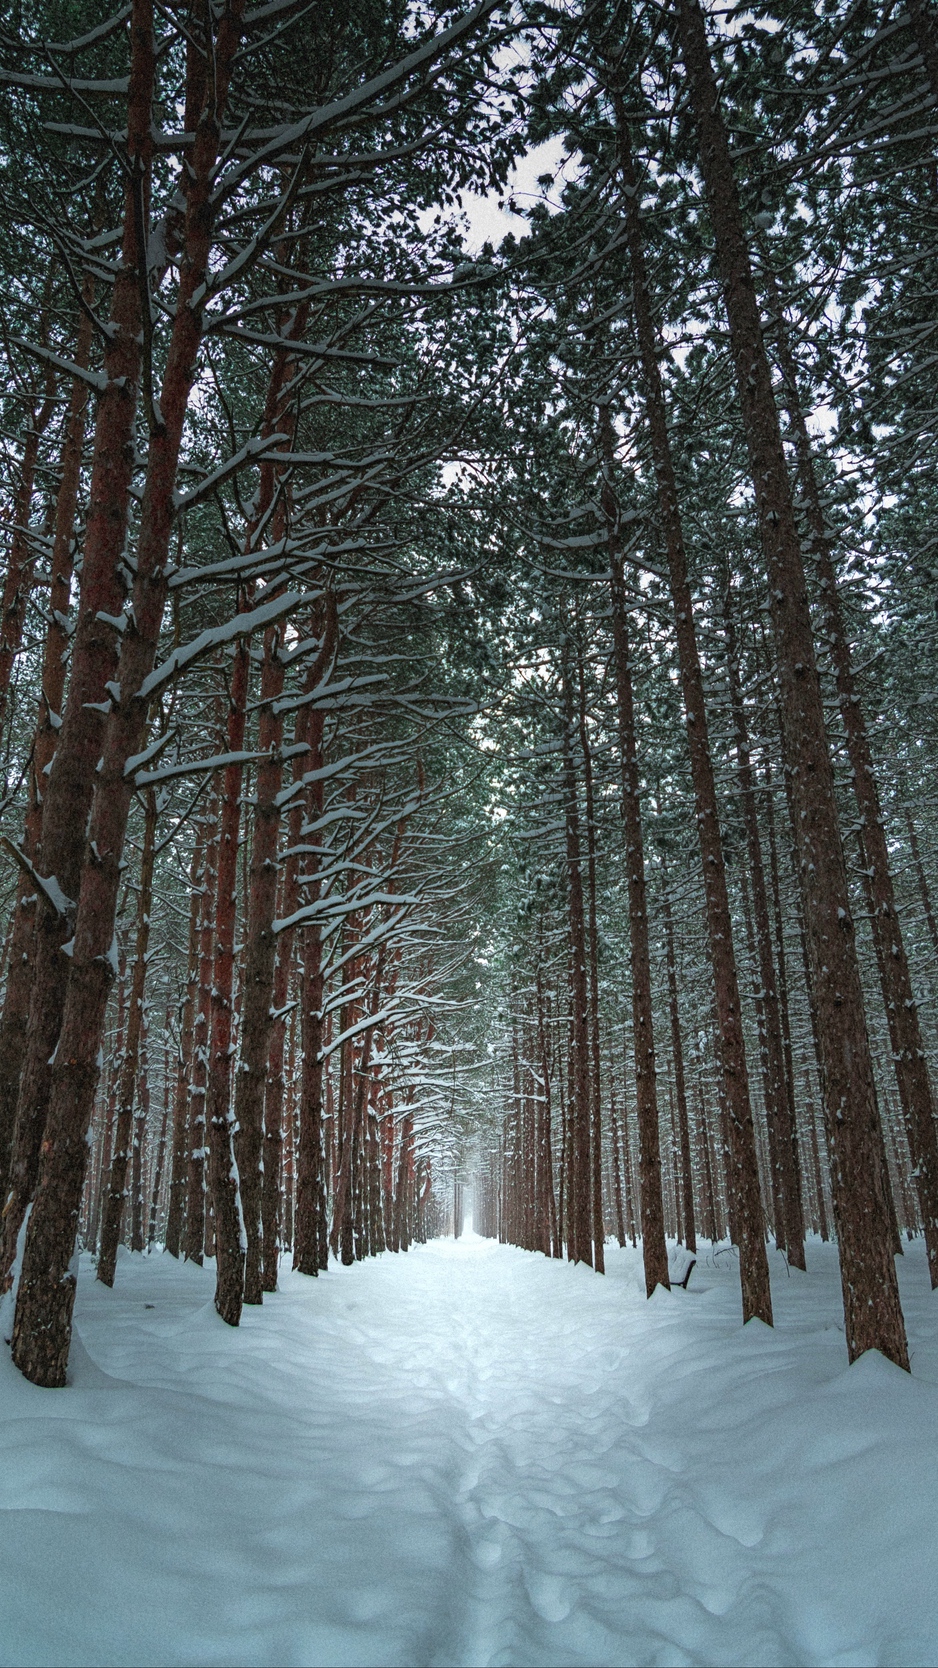 Download wallpaper 938x1668 winter, forest, trail, snow